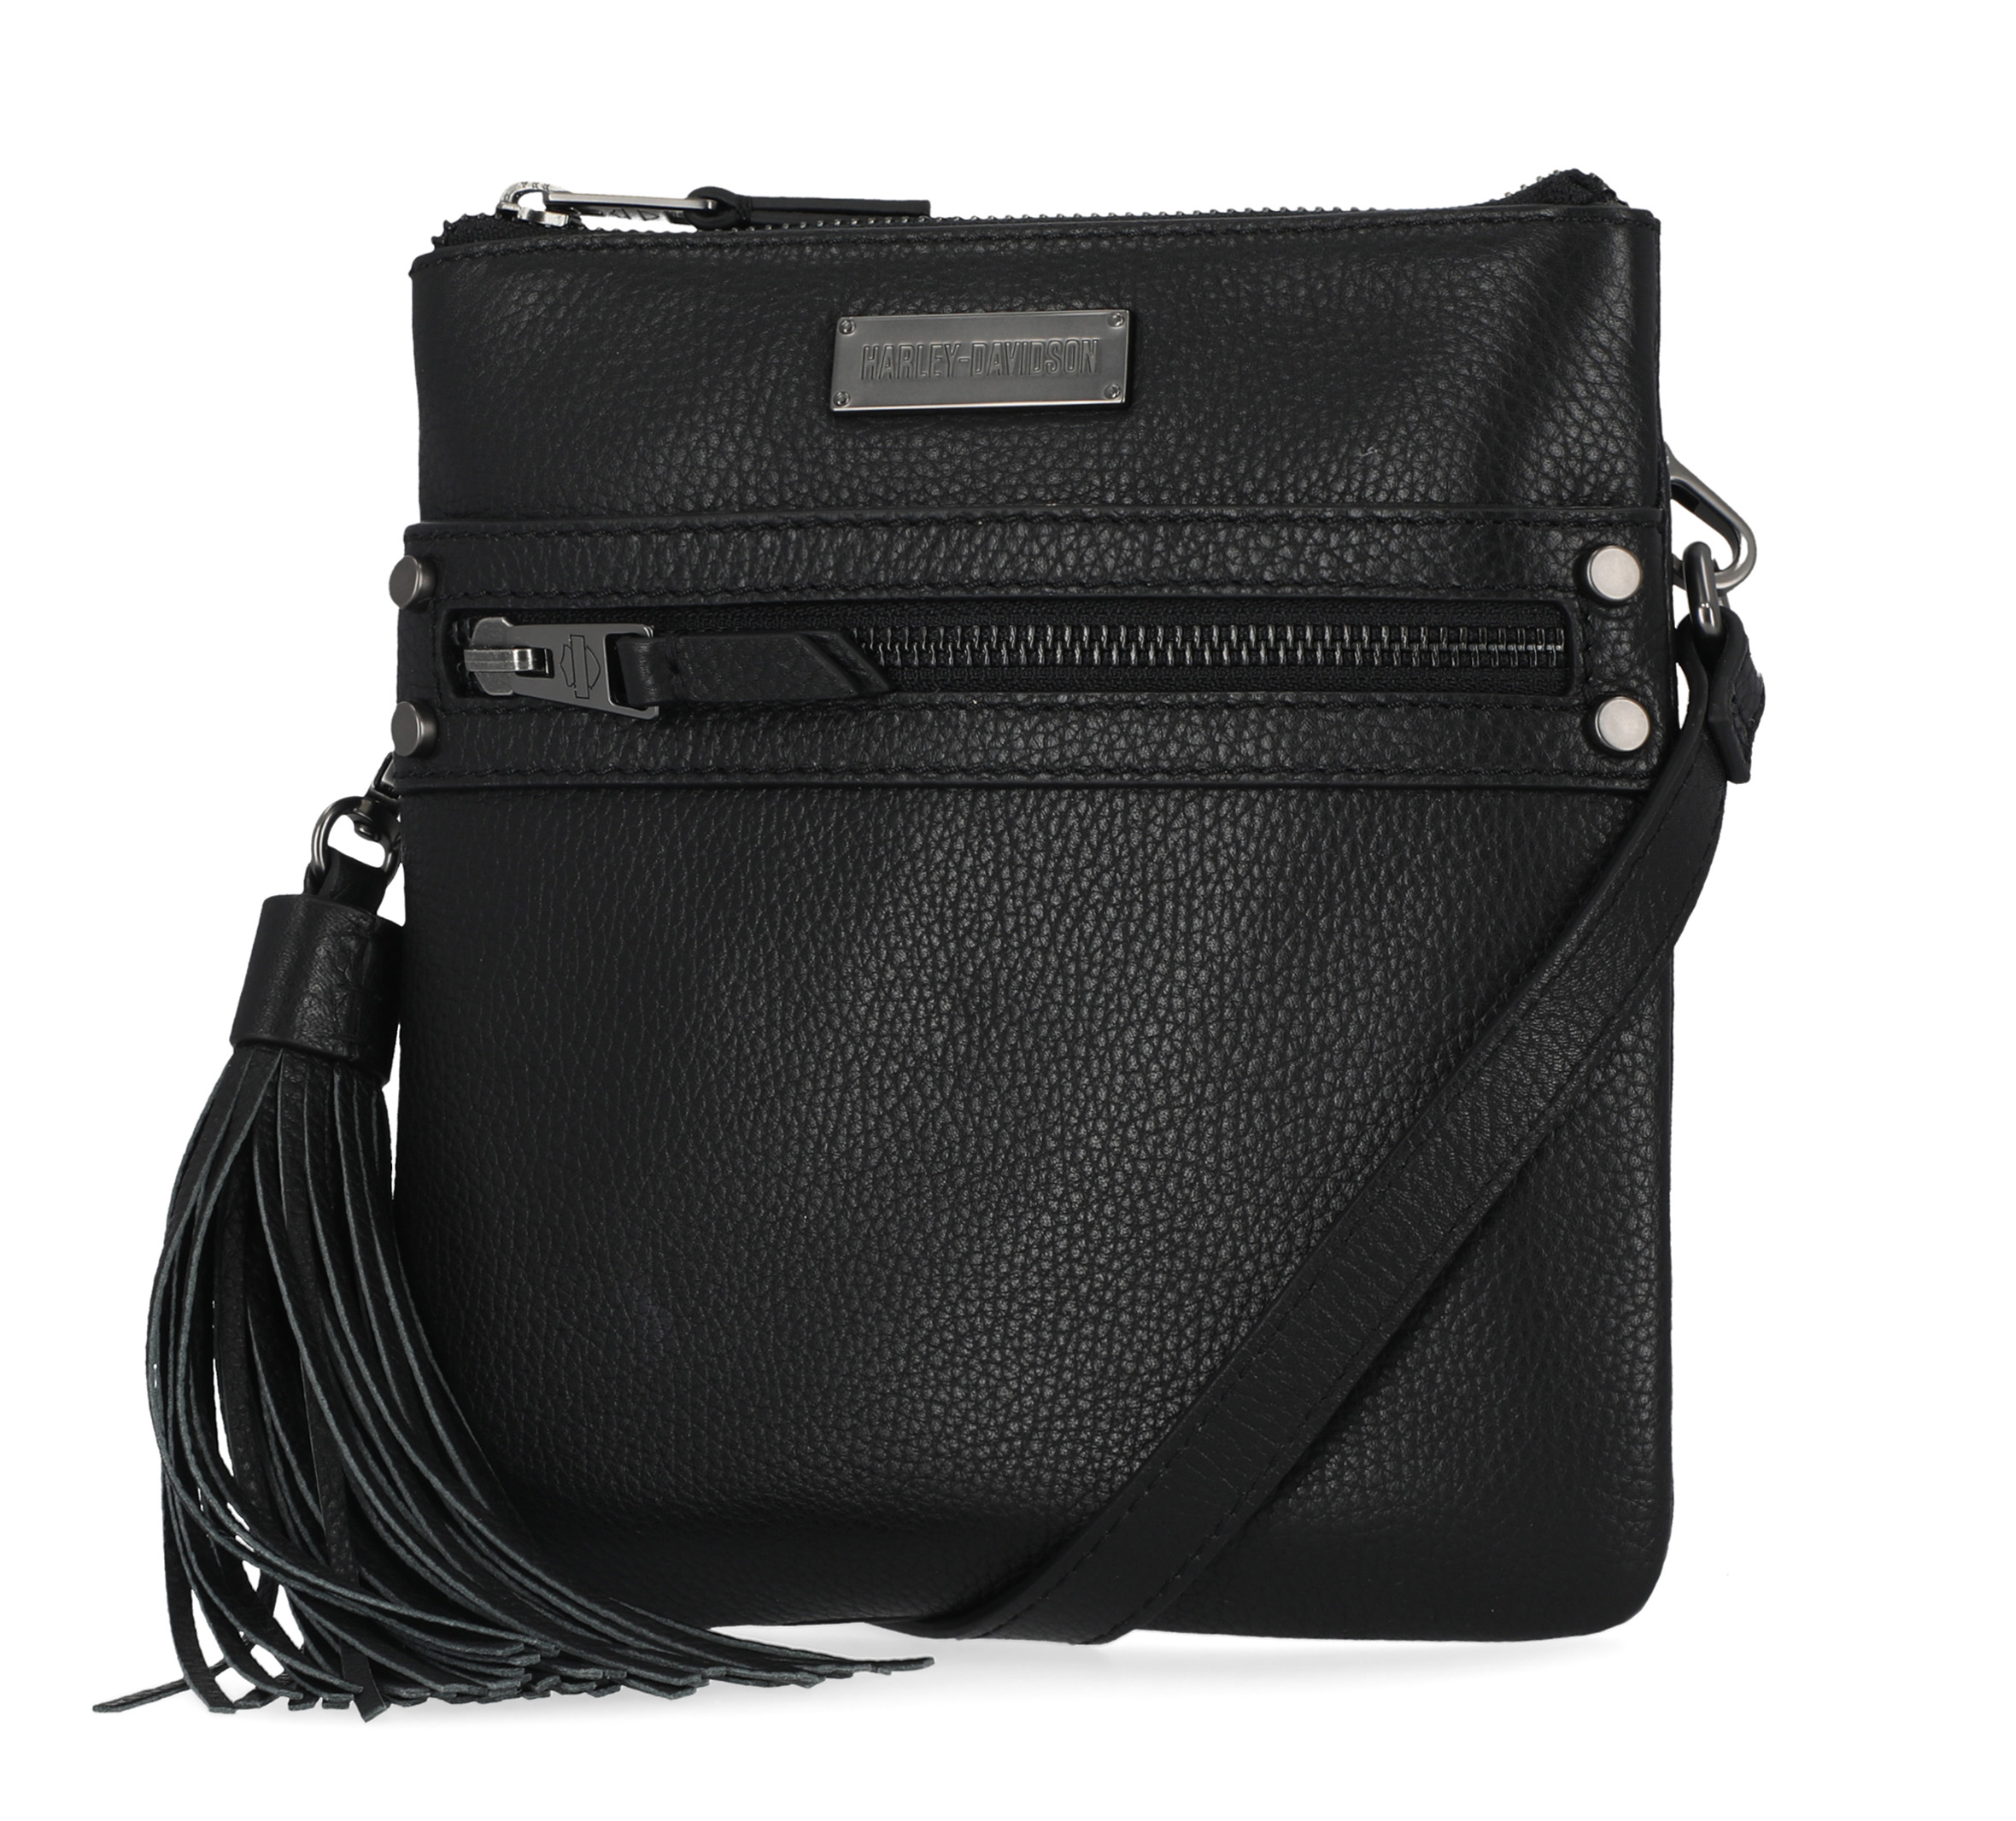 Harley-Davidson Zip Small Bags & Handbags for Women for sale